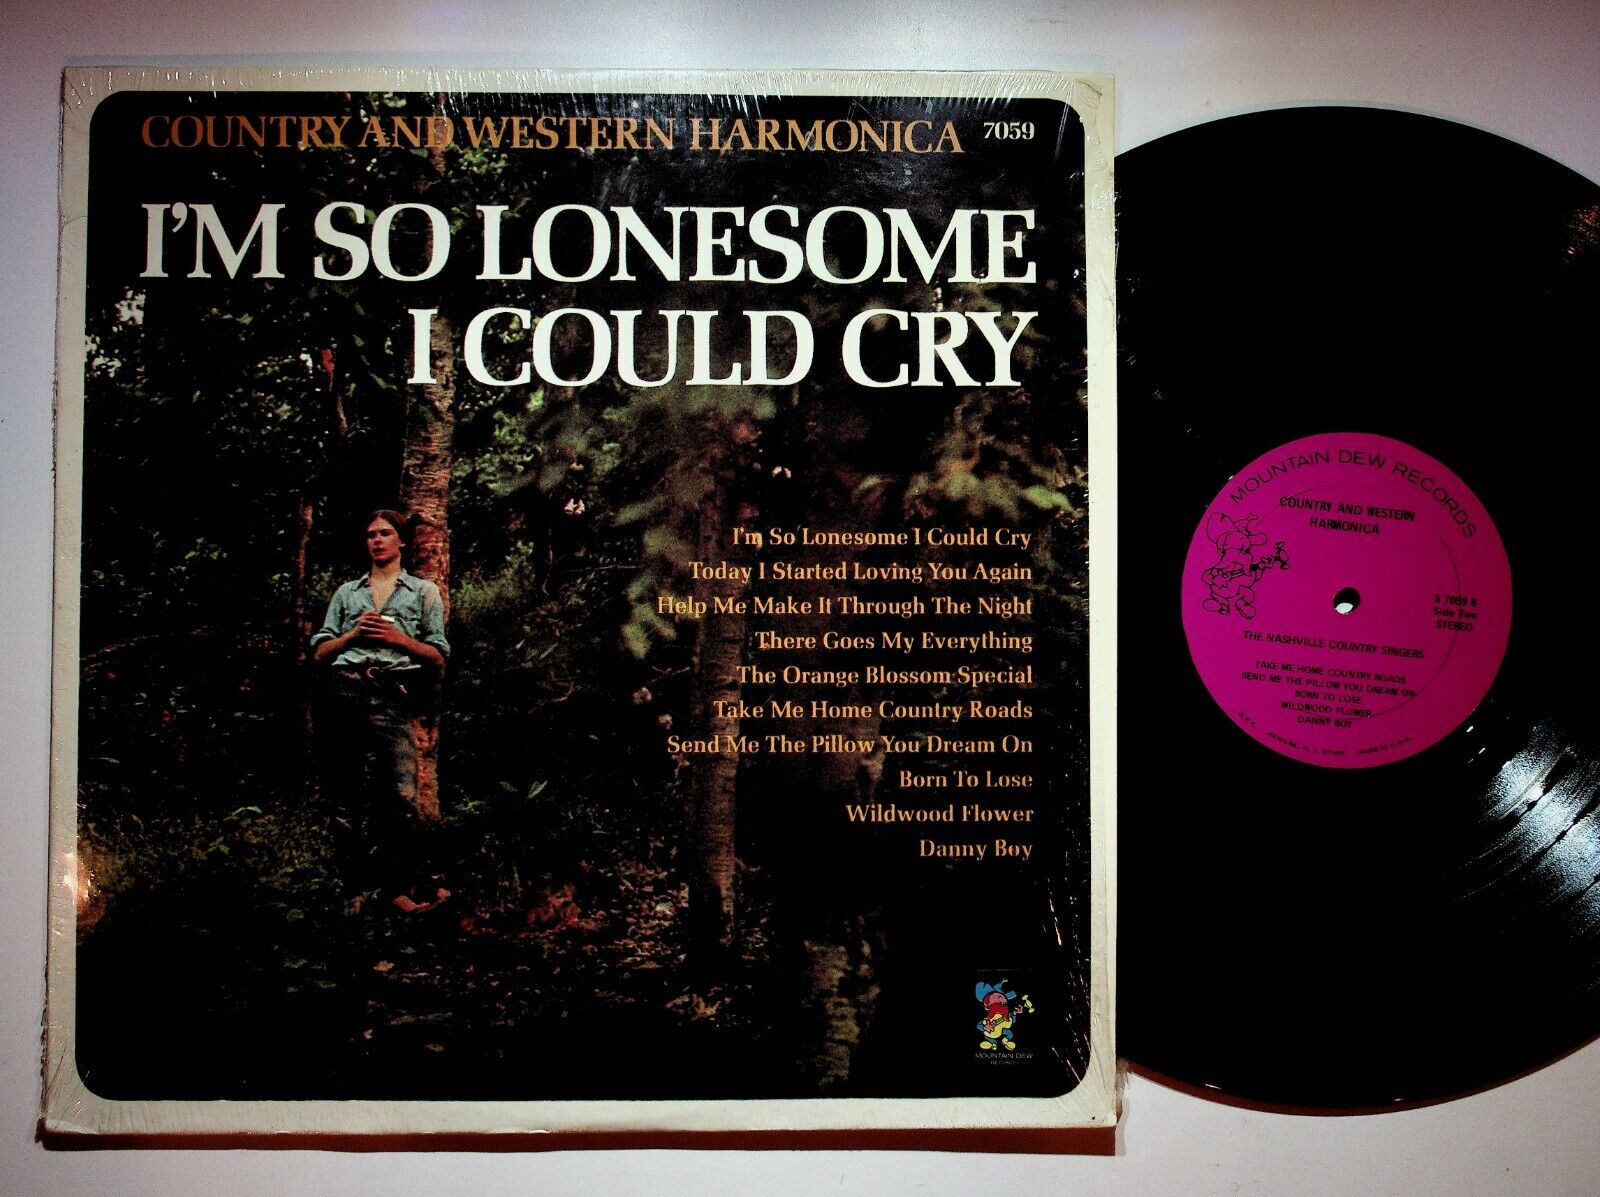 1972 Country & Western Harmonica I\'m So Lonesome I Could Cry Vinyl LP Record VG+